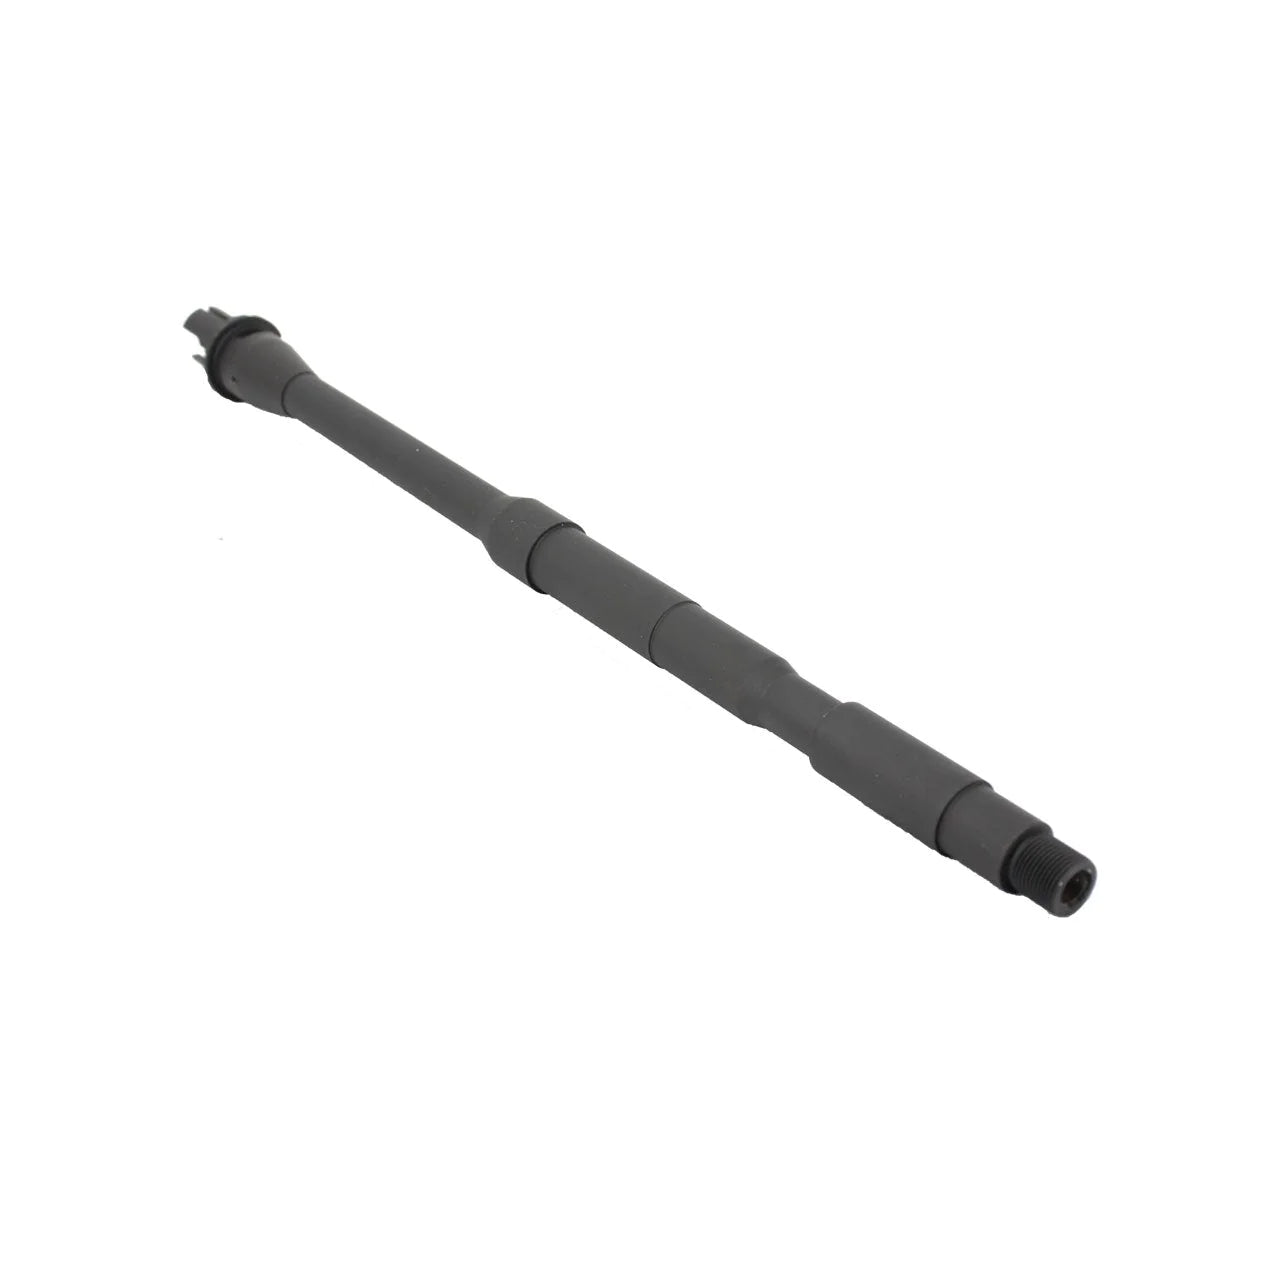 Full Metal Outer Barrel for M4/M16 Series Airsoft AEGs (16")